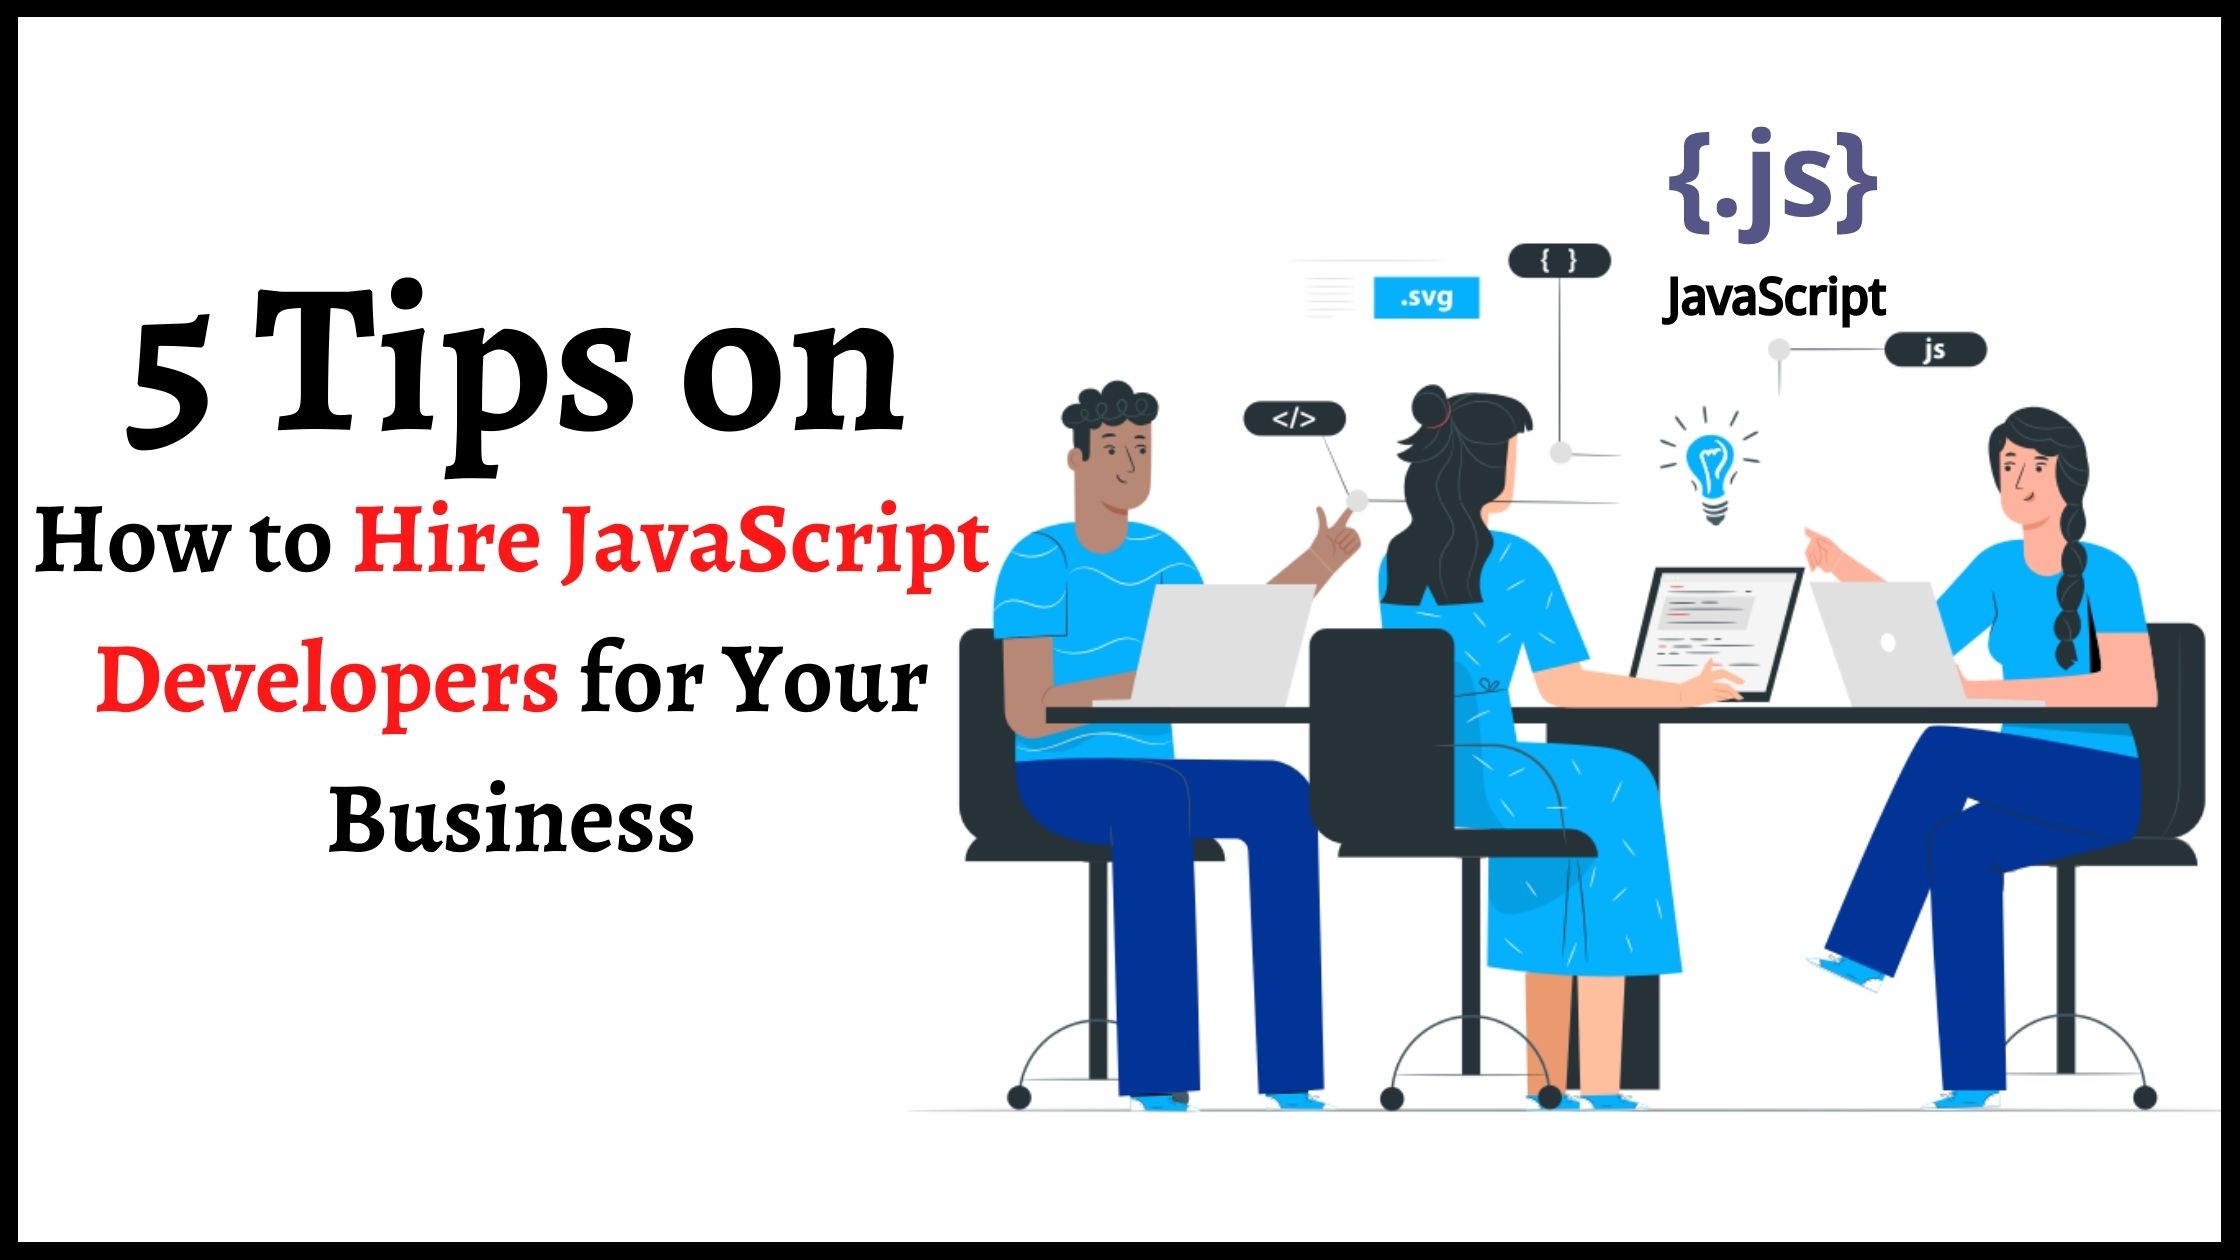 5 Steps to Hire JavaScript Developers for Your Business